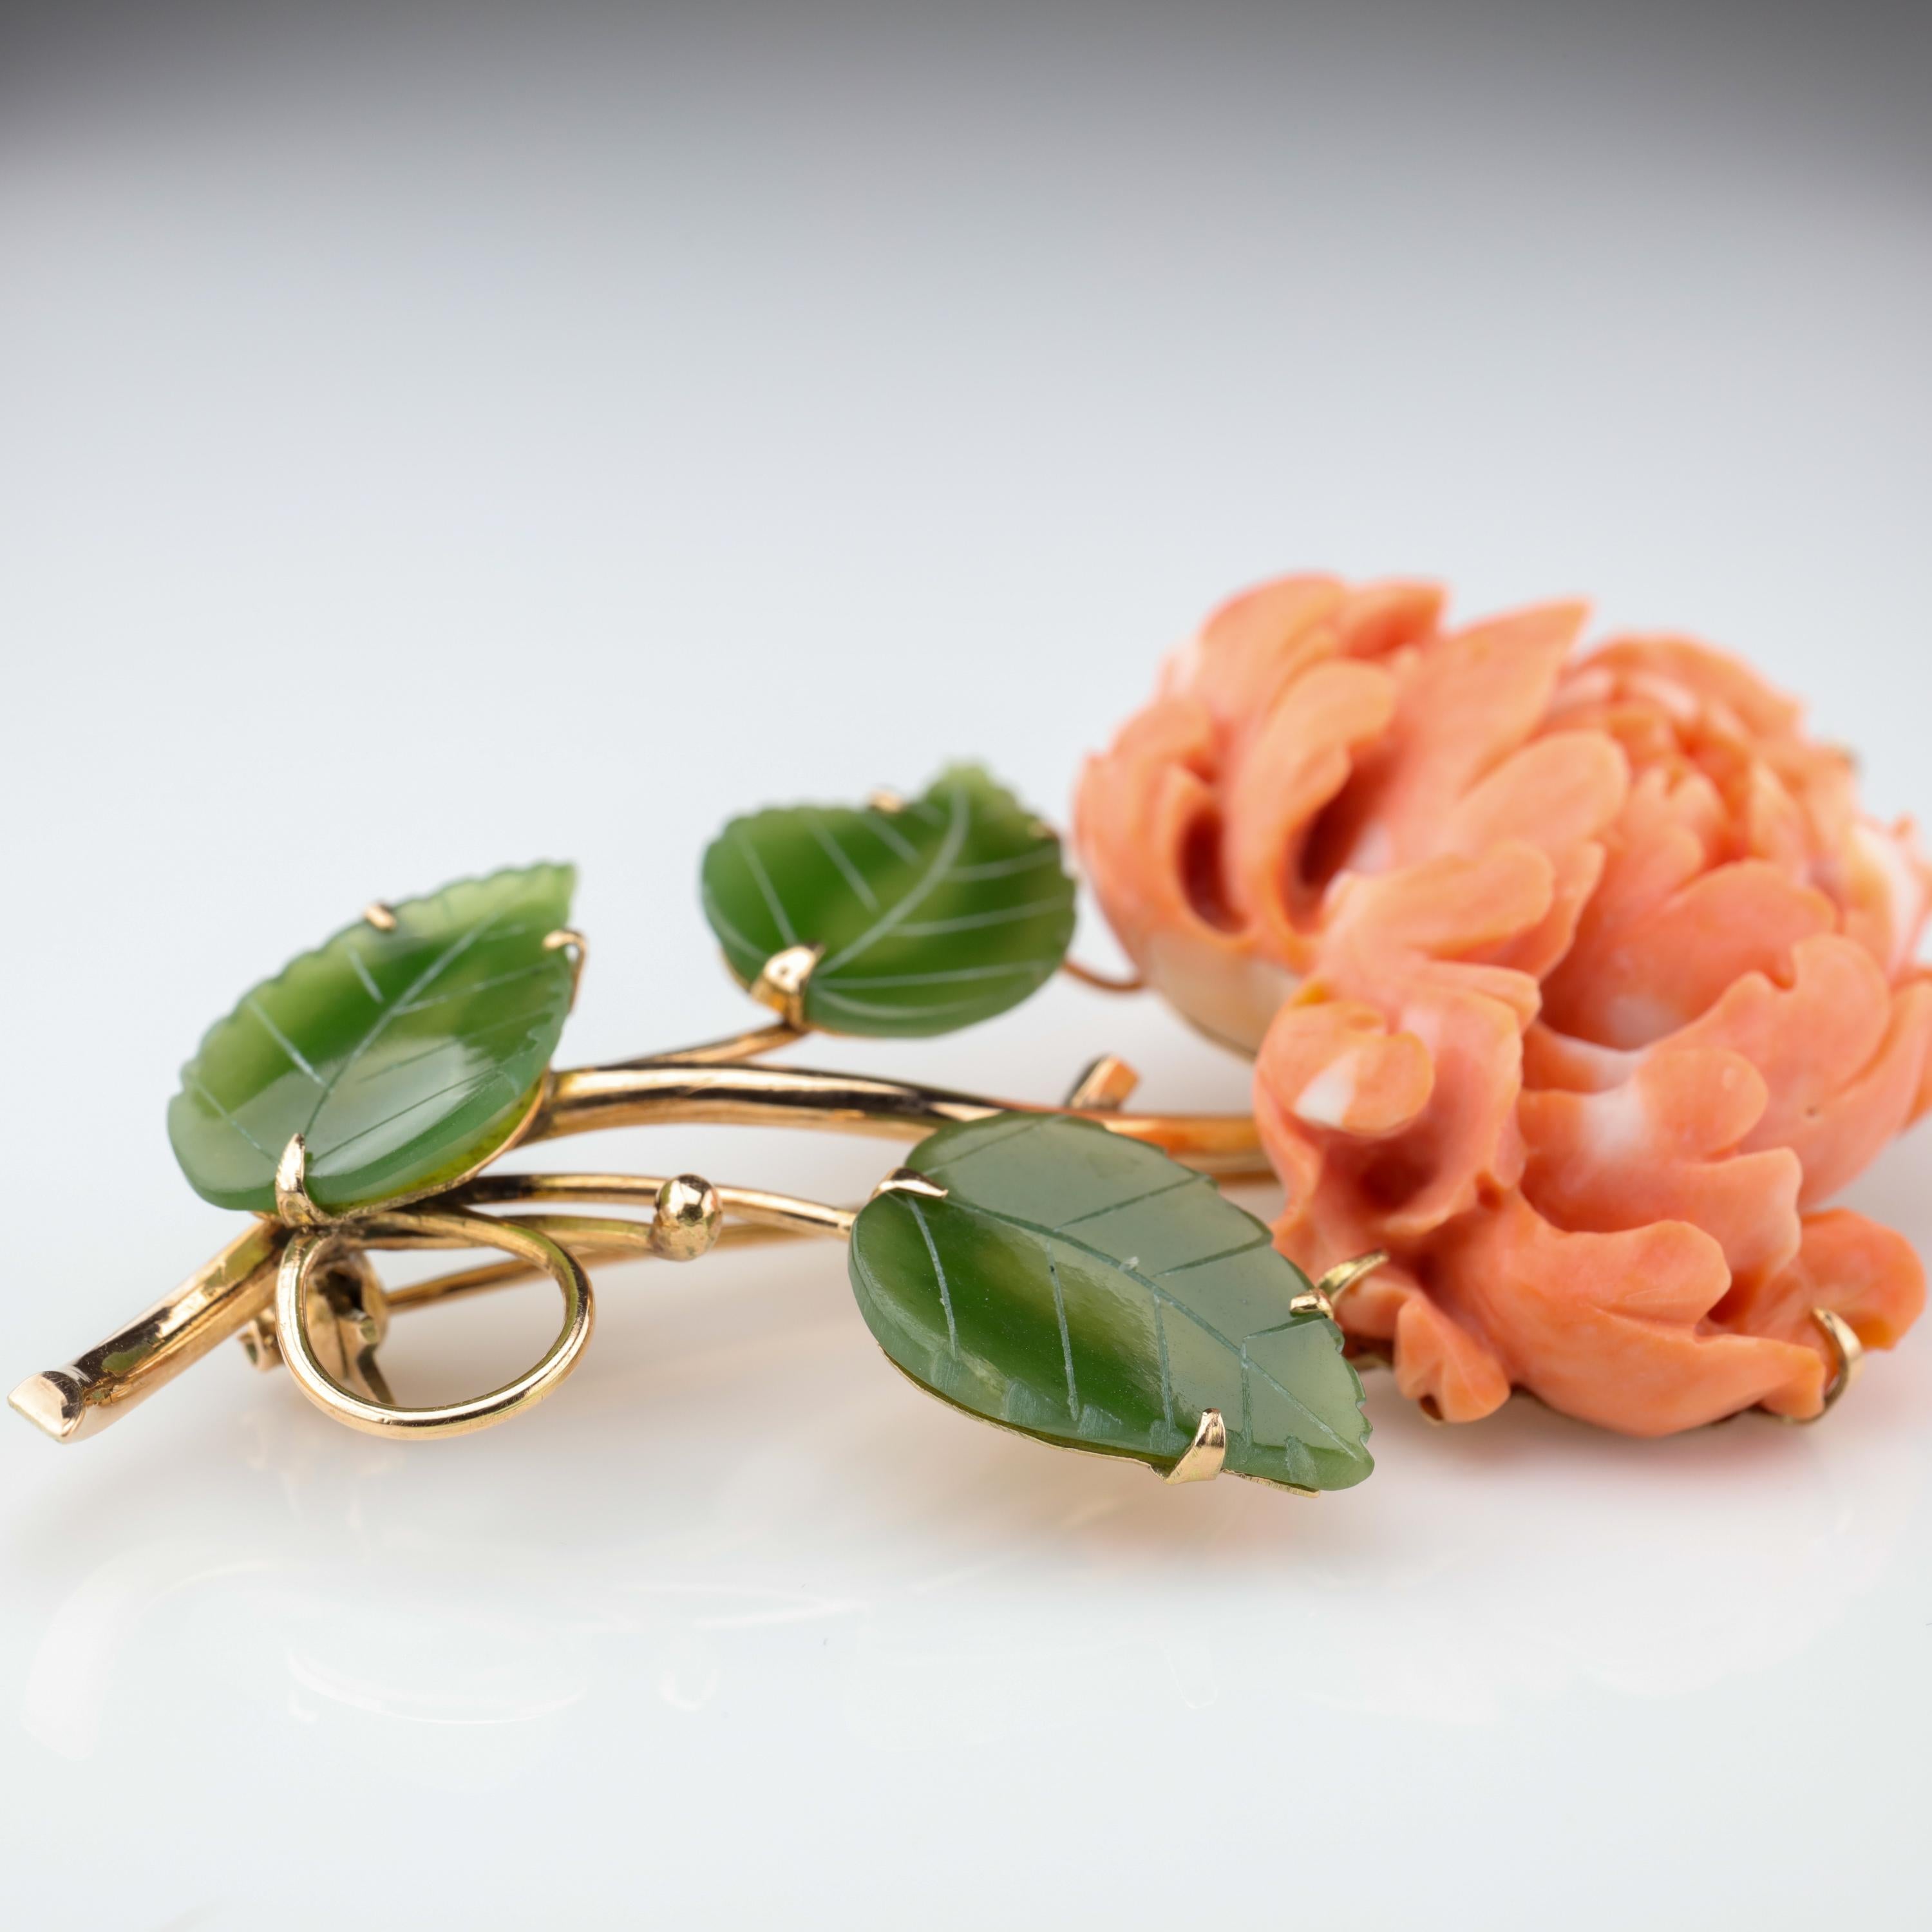 Brooch of Coral and Jade Depicting Chrysanthemum Blossom and Leaves 1